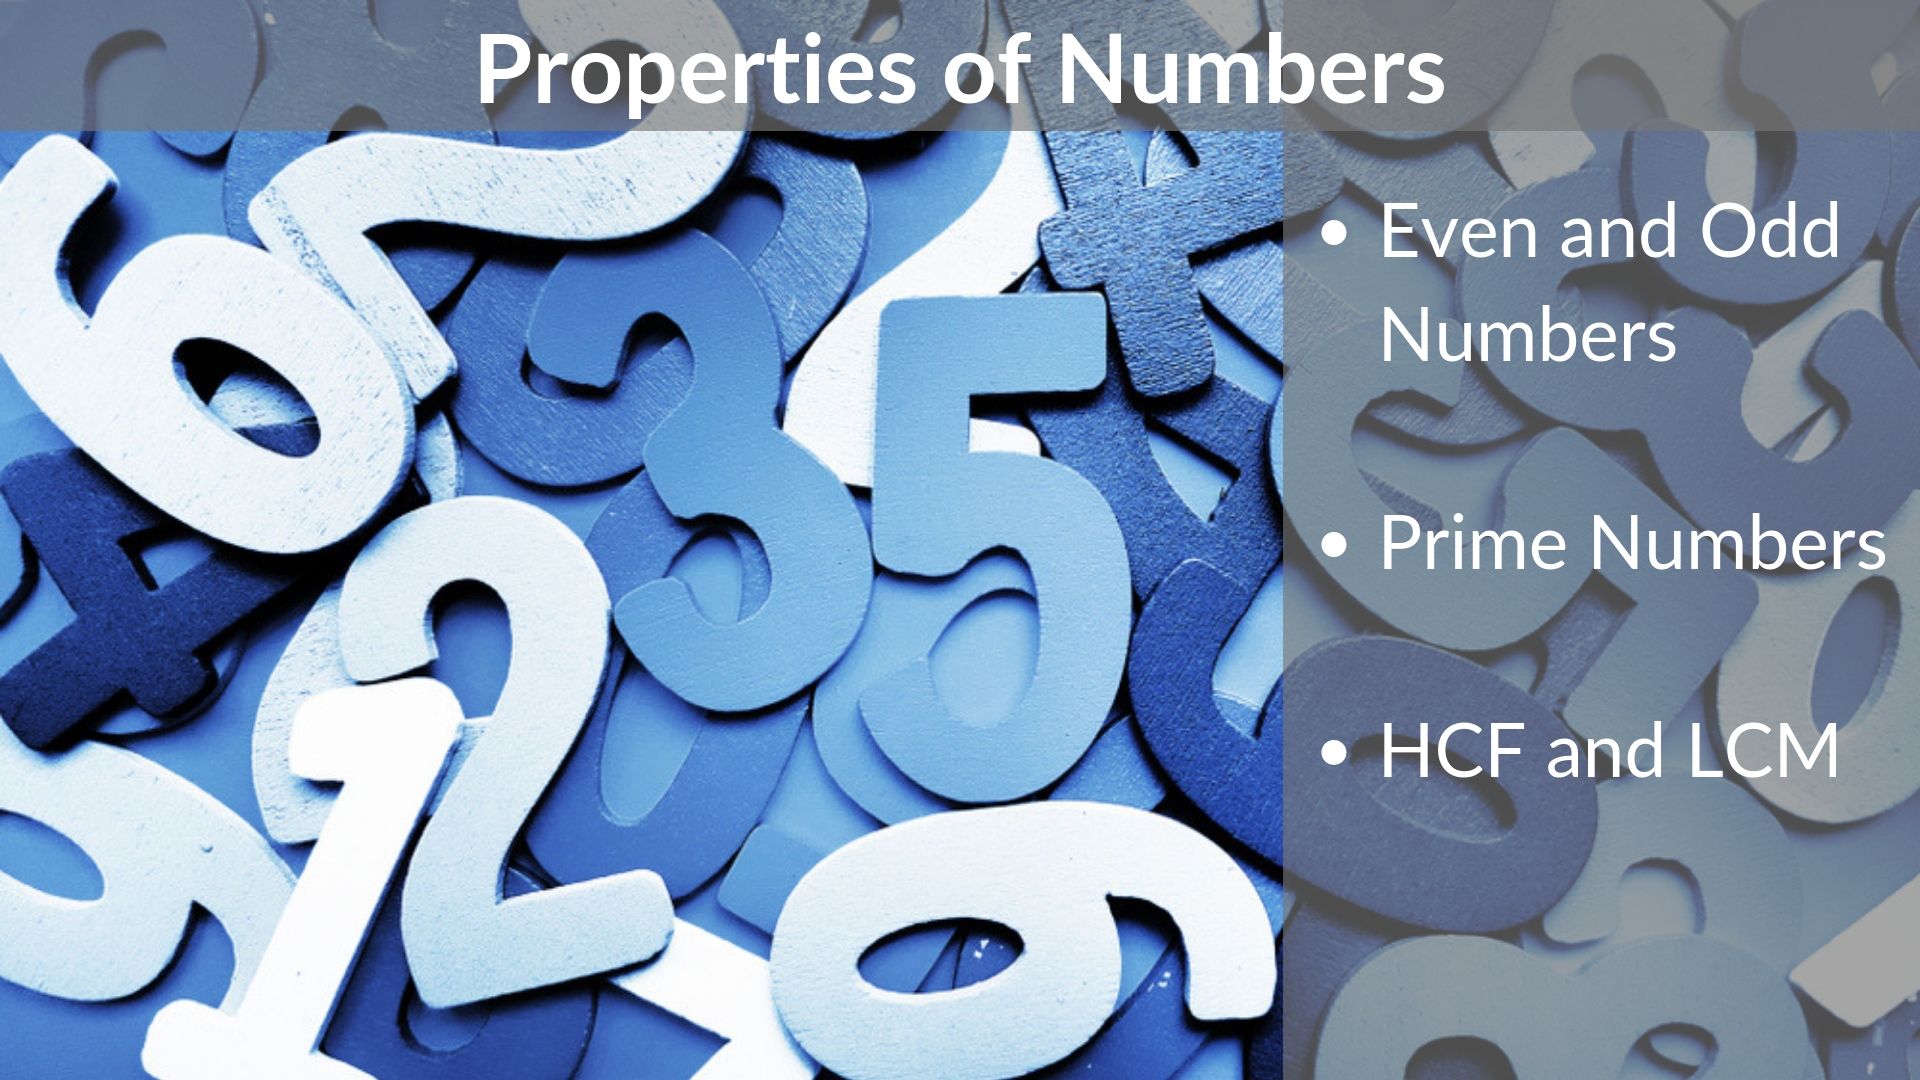 Properties of Numbers - Even and Odd - Prime numbers - HCF and LCM